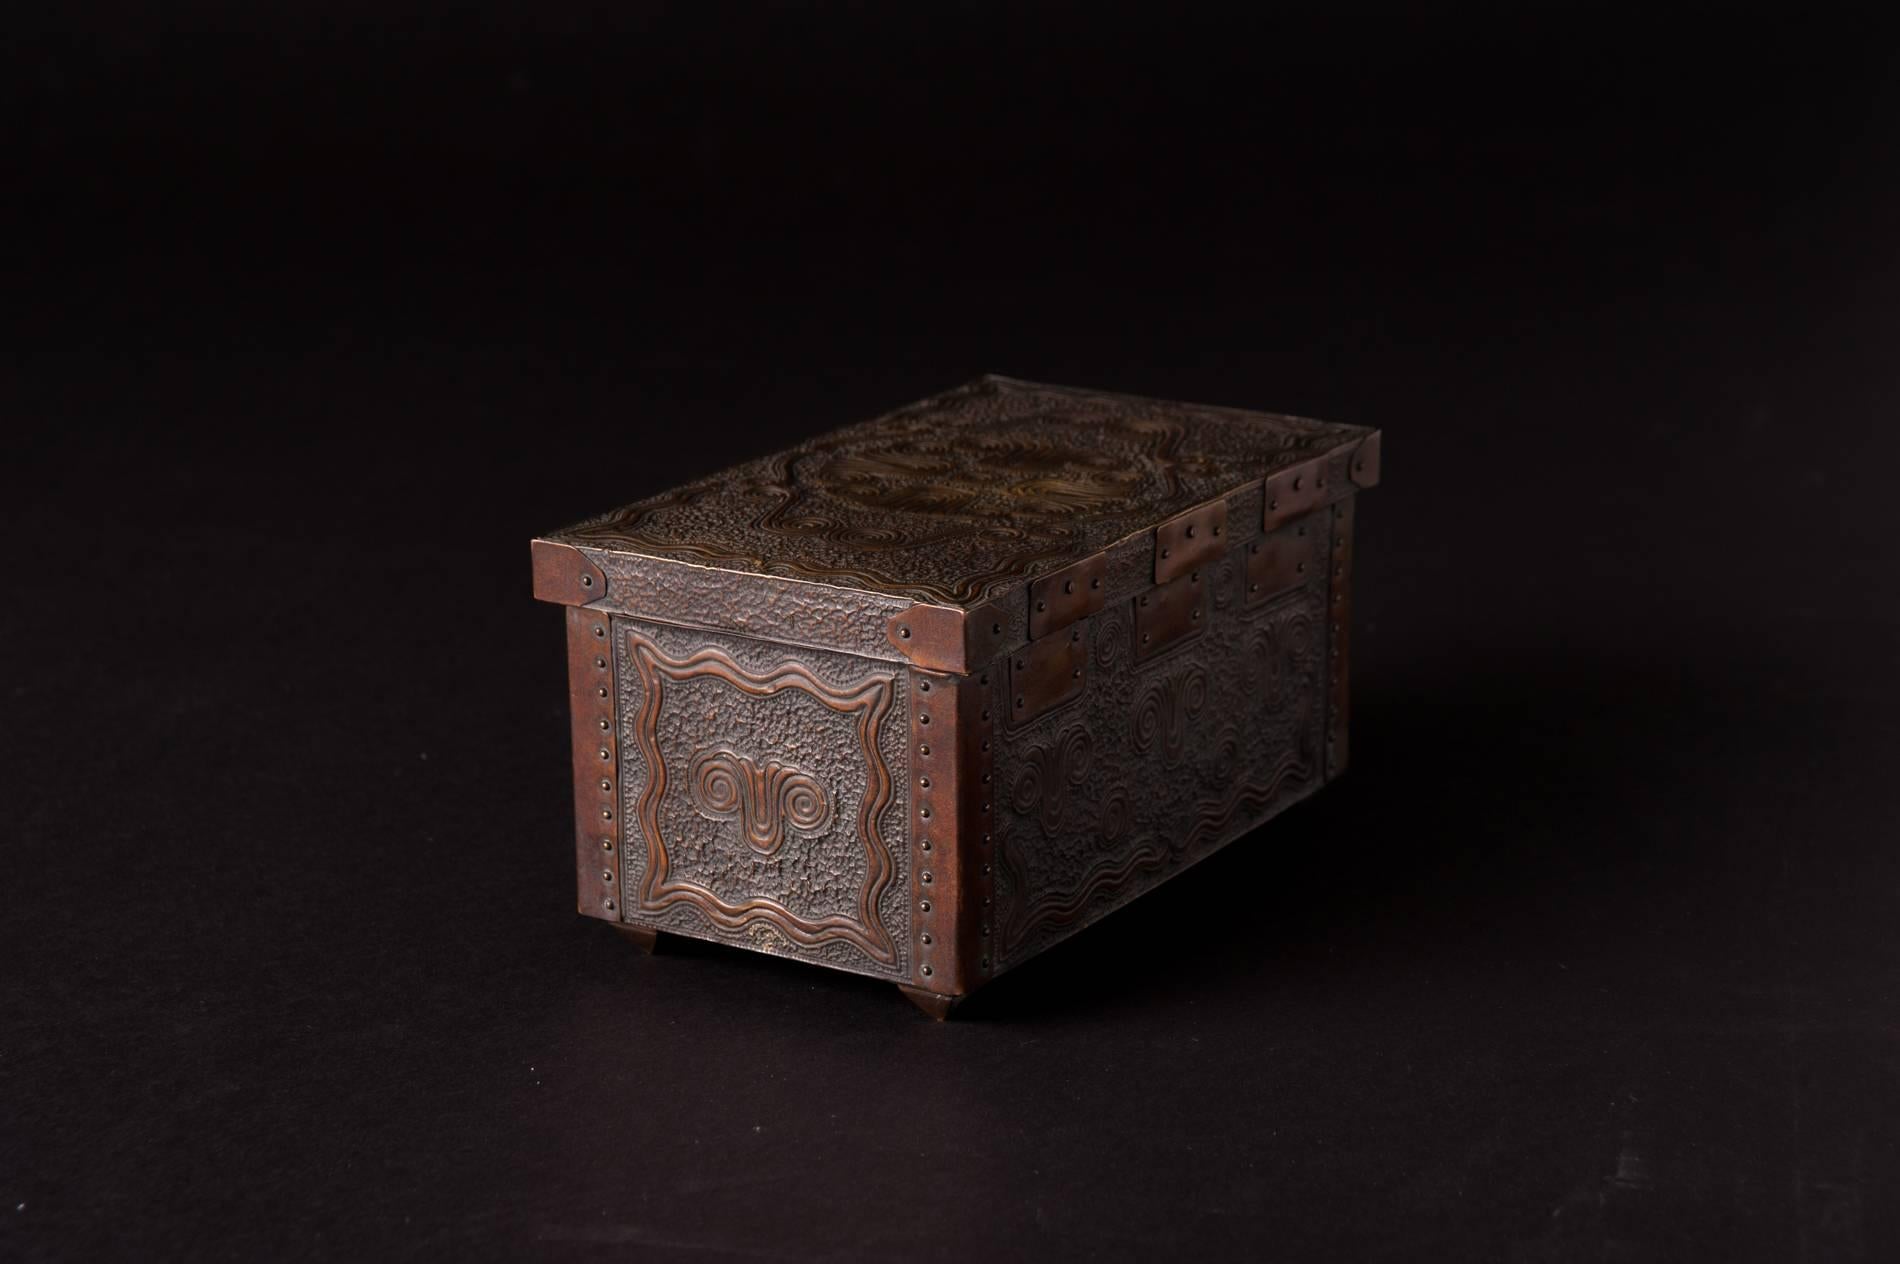 A fine example of metal smithing, this box has been lovingly constructed. The metal cladding is secured by metal coping at the corners and hinge work. Each nailhead is perfectly spaced and evenly secured. Only a craftsman of considerable merit could